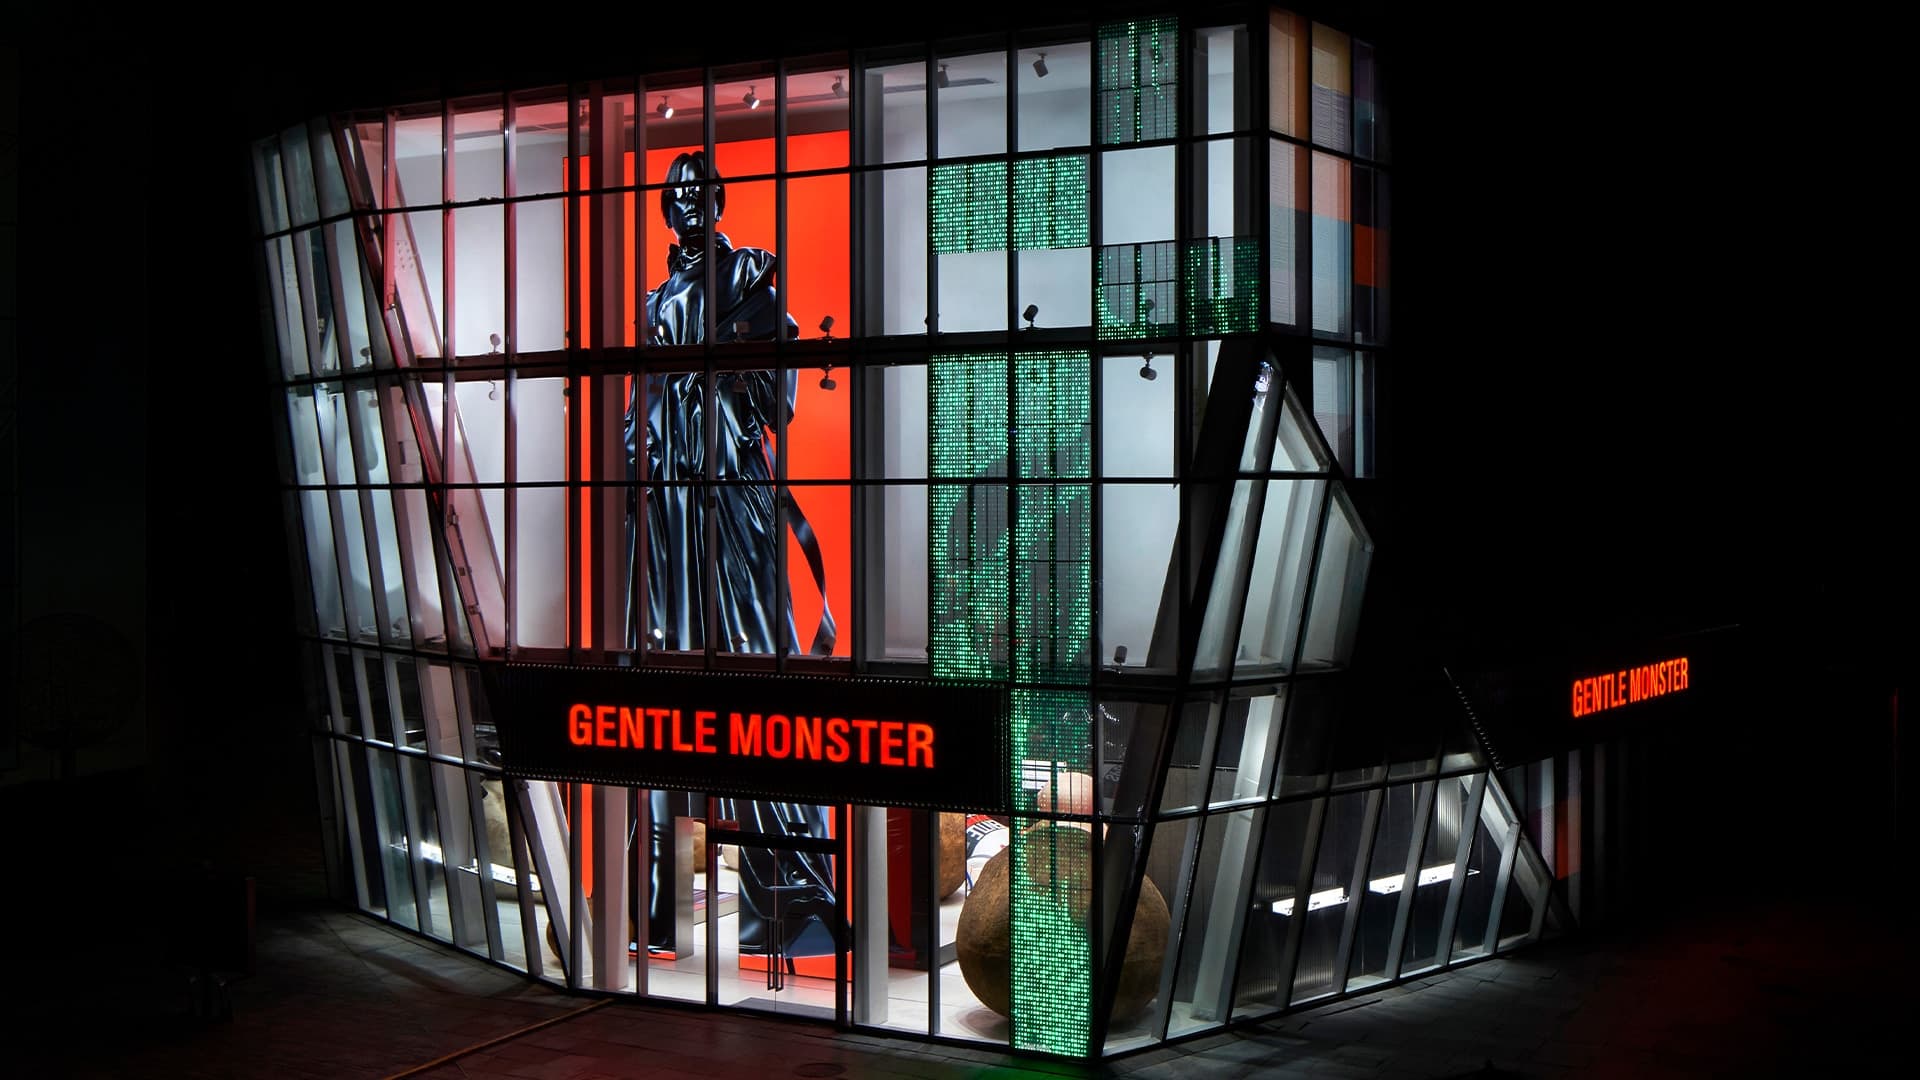 Gentle Monster taps into cosmetic business - Retail in Asia